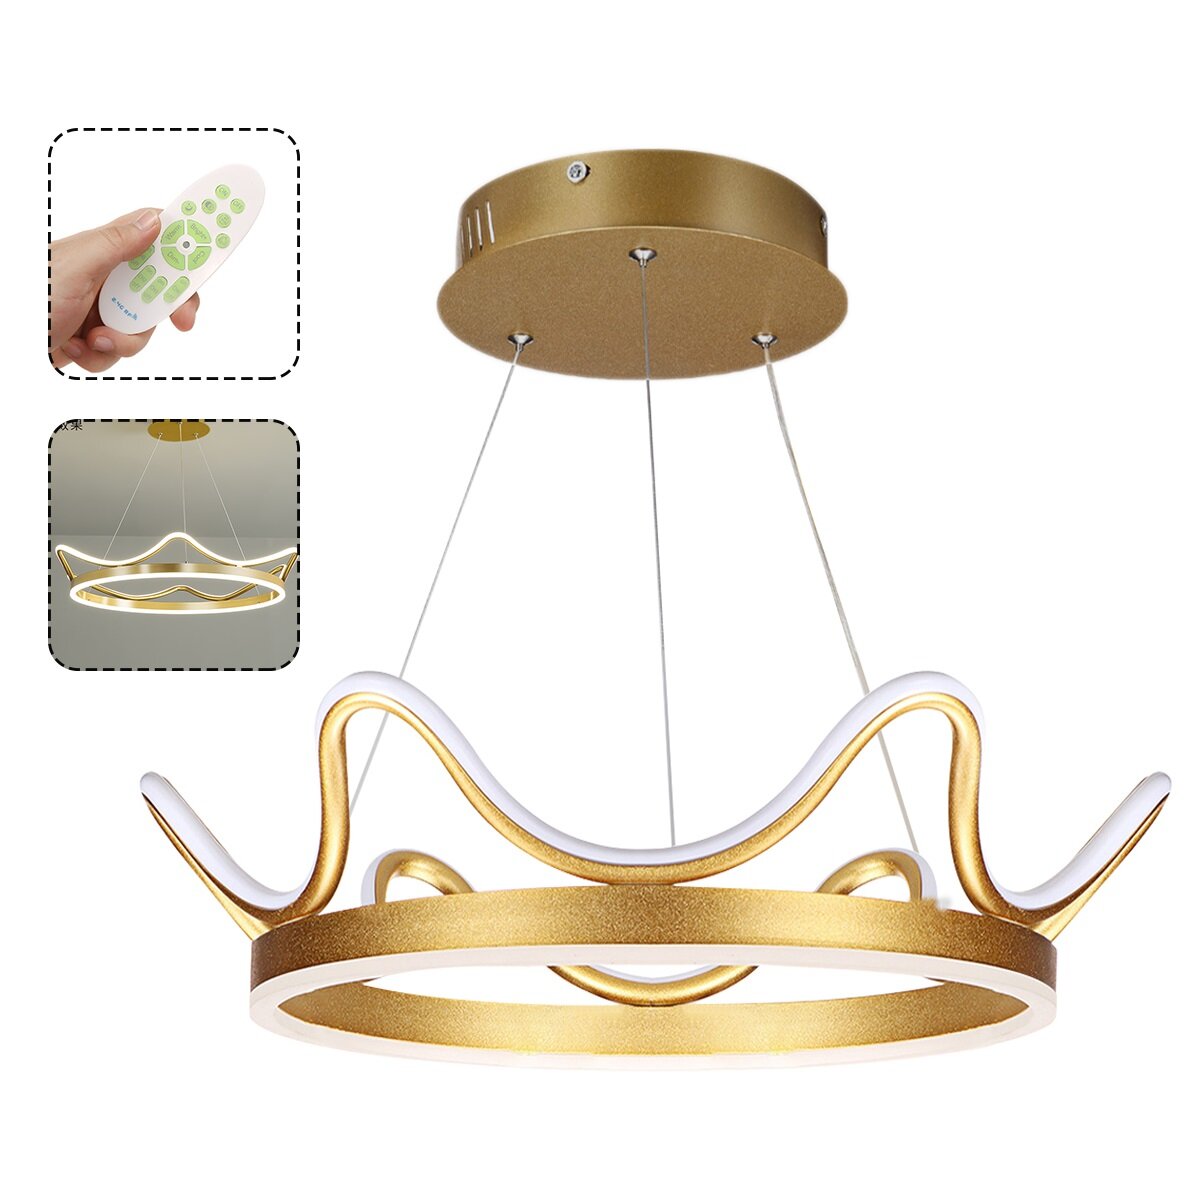 Image of 73W 85-265V Remote Control Crown LED Pendant Lamp Ceiling Light Home Bedroom Indoor Dimming Fixture Decor